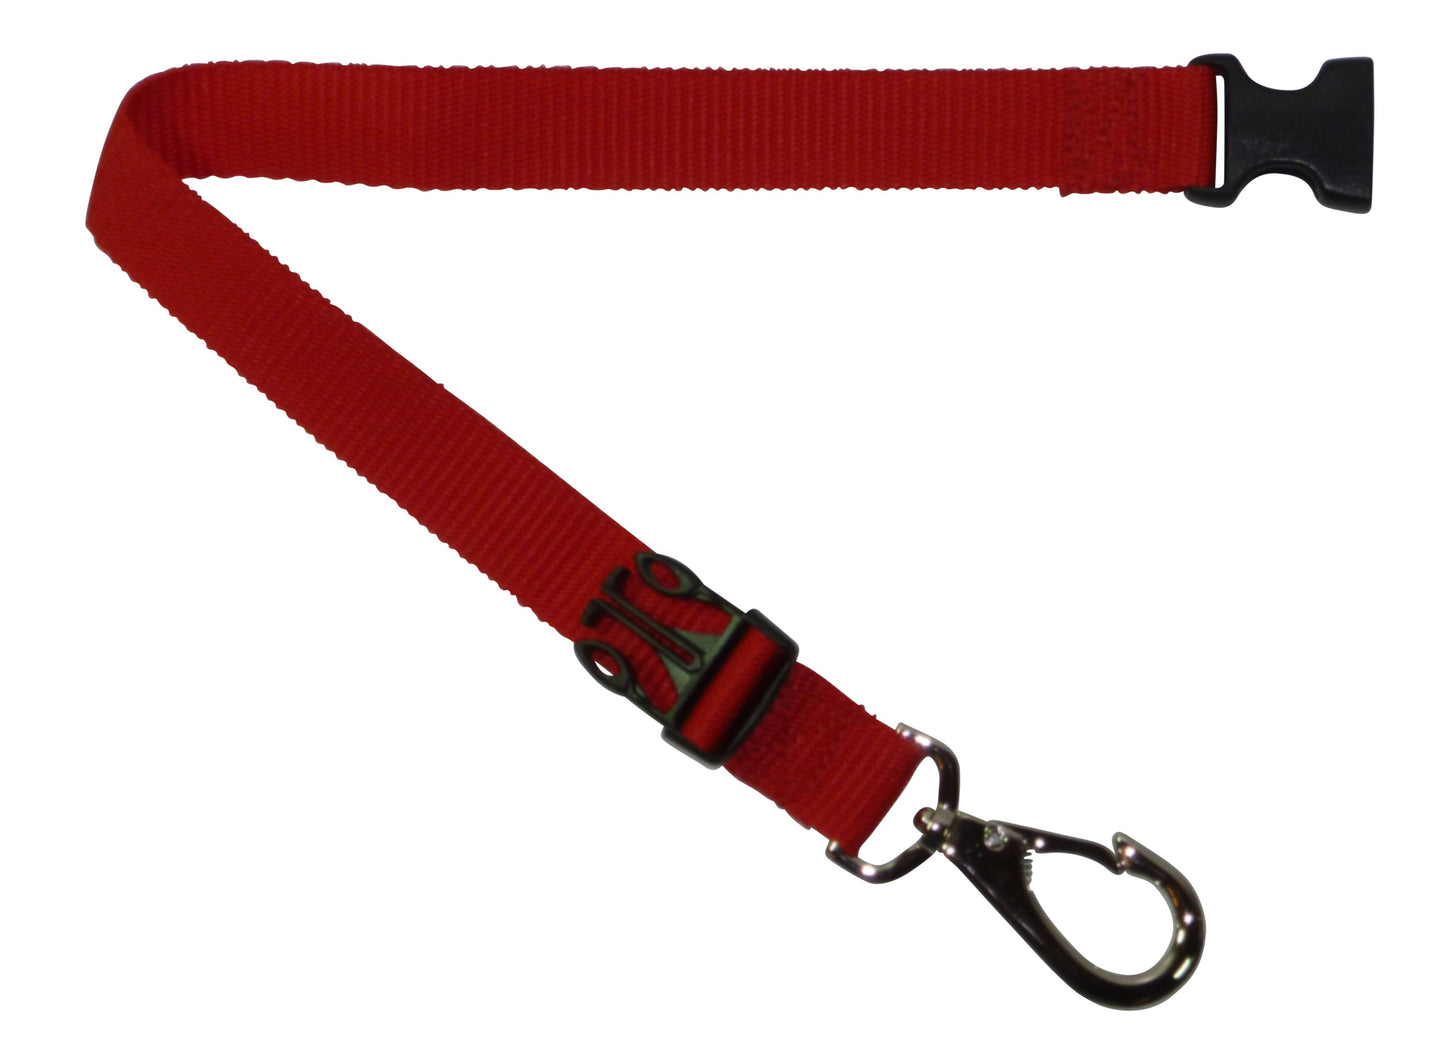 Benristraps Bag Support Strap, Pack of 2 Straps in red